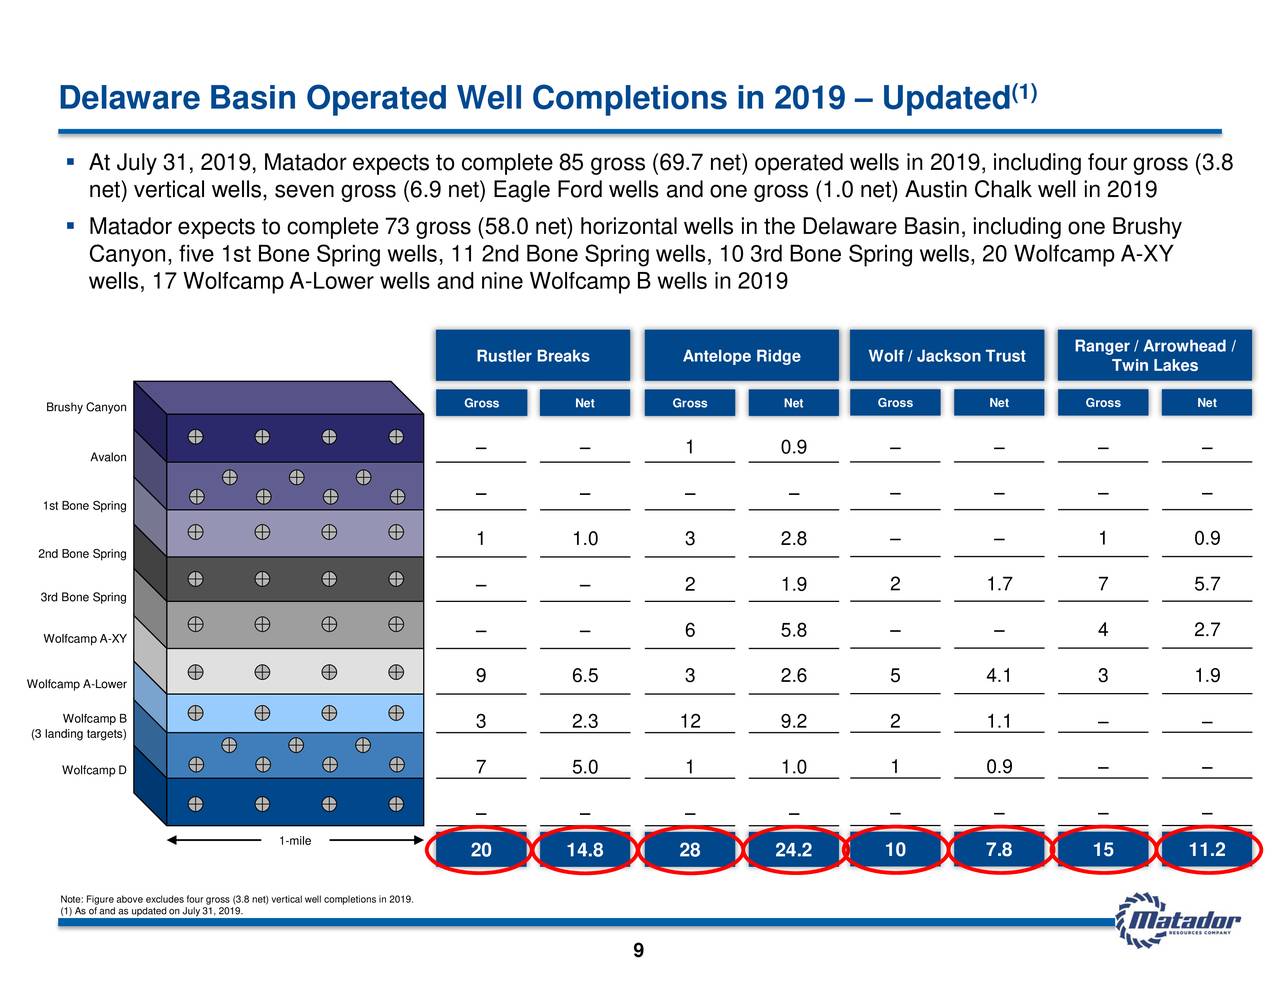 Delaware Basin Operated Well Completions in 2019 – Updated                                                 (1)